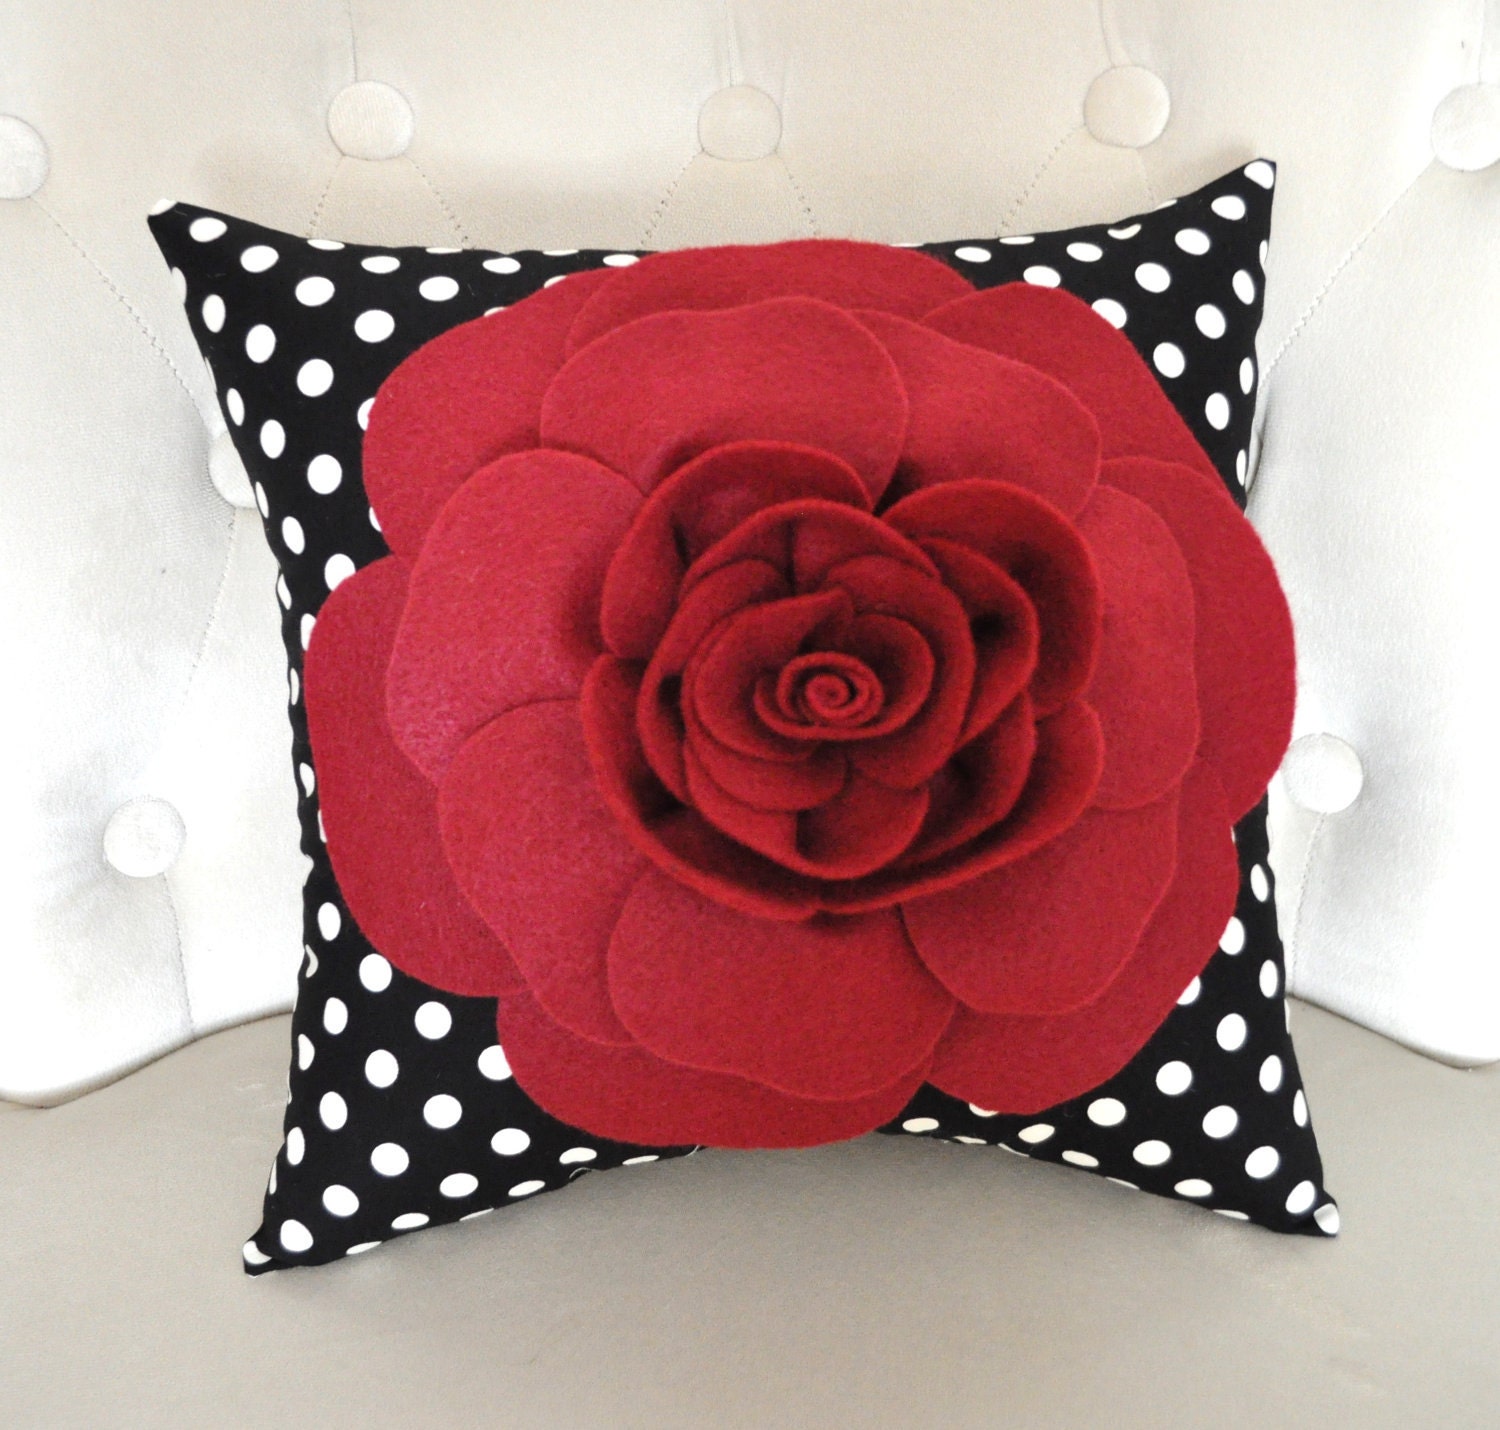 Ruby Red Rose Pillow on Black with White Polka Dot Pillow - bedbuggs